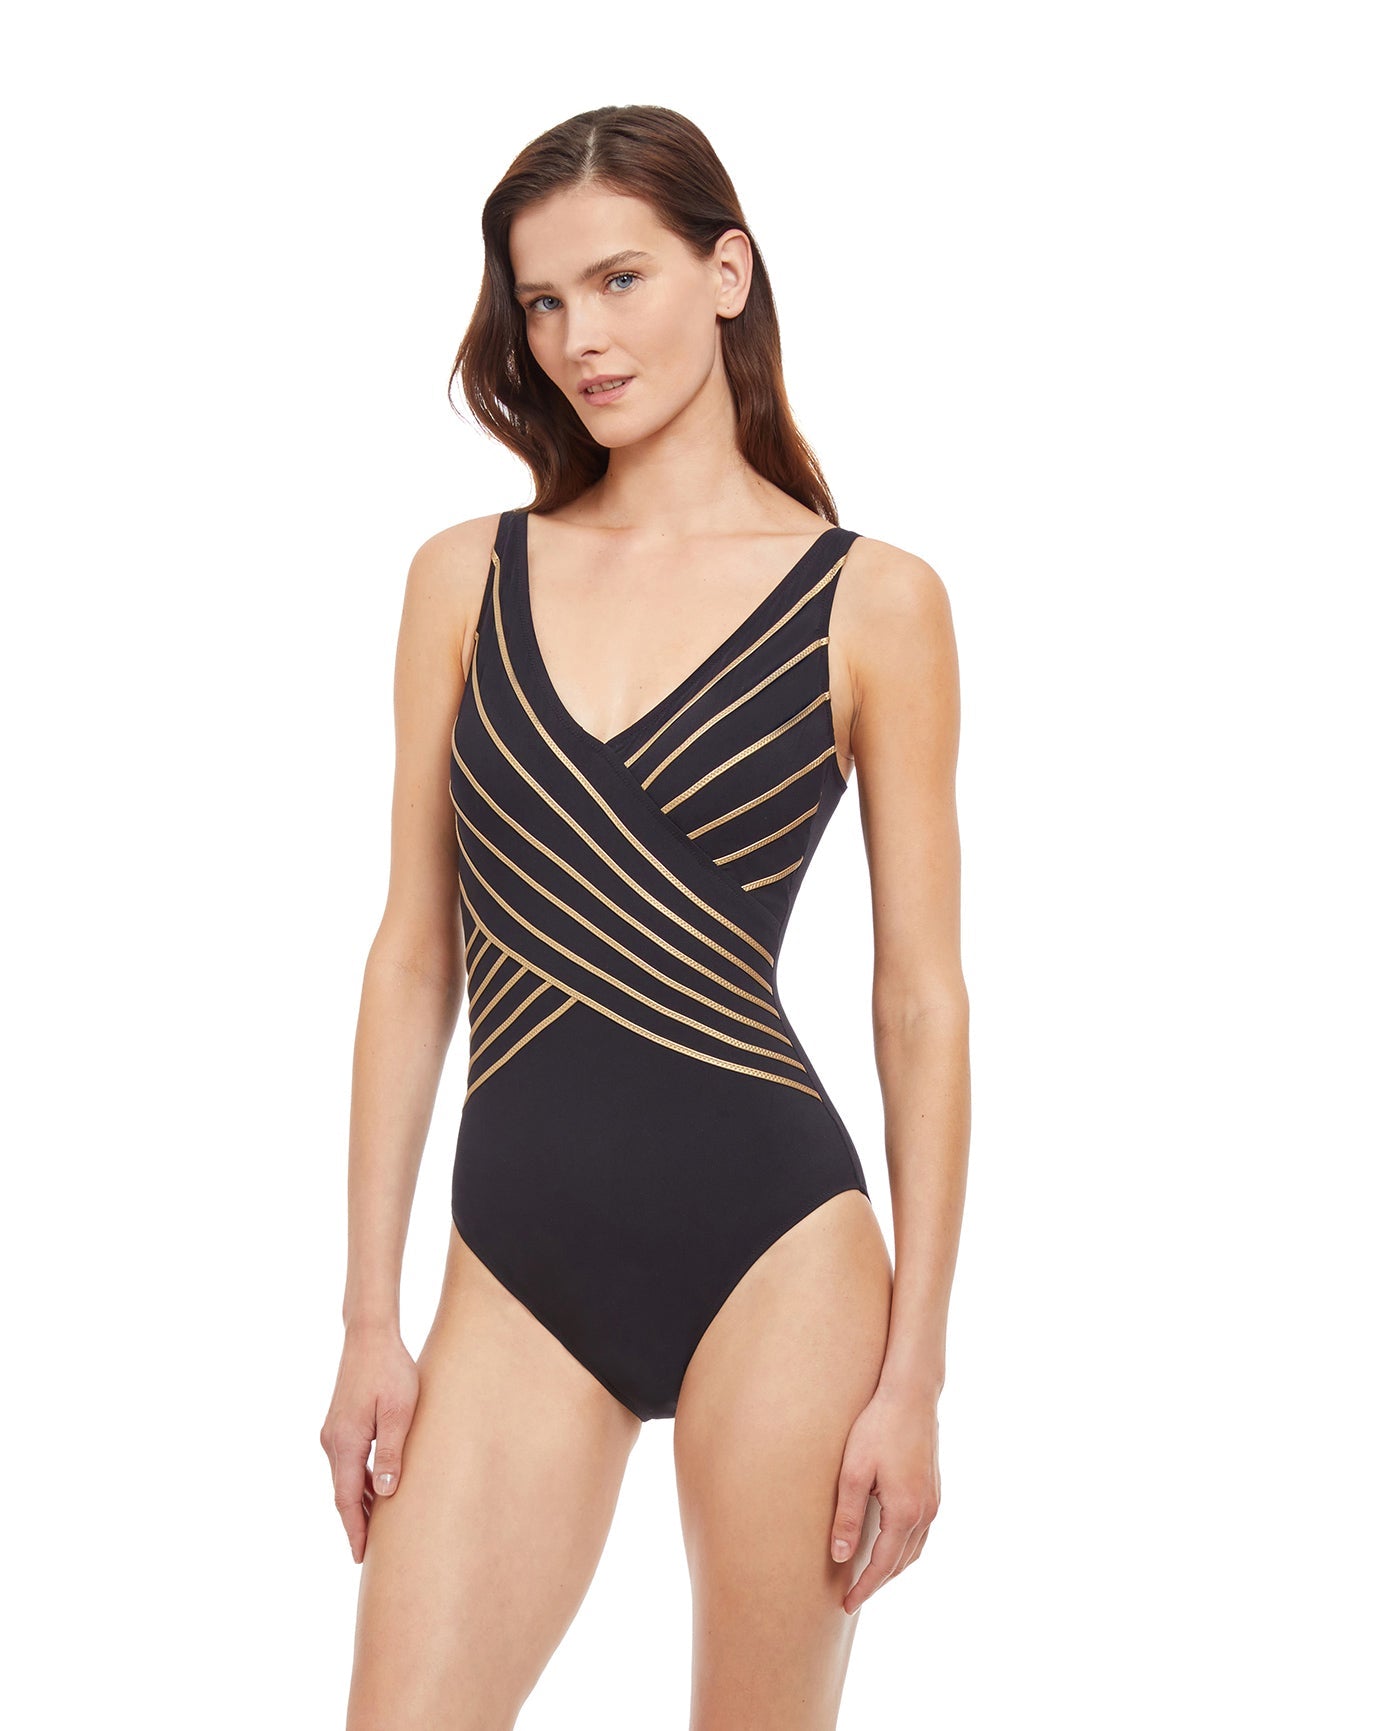 Back View Of Gottex Essentials Embrace V-Neck Surplice One Piece Swimsuit | Gottex Embrace Green And Gold